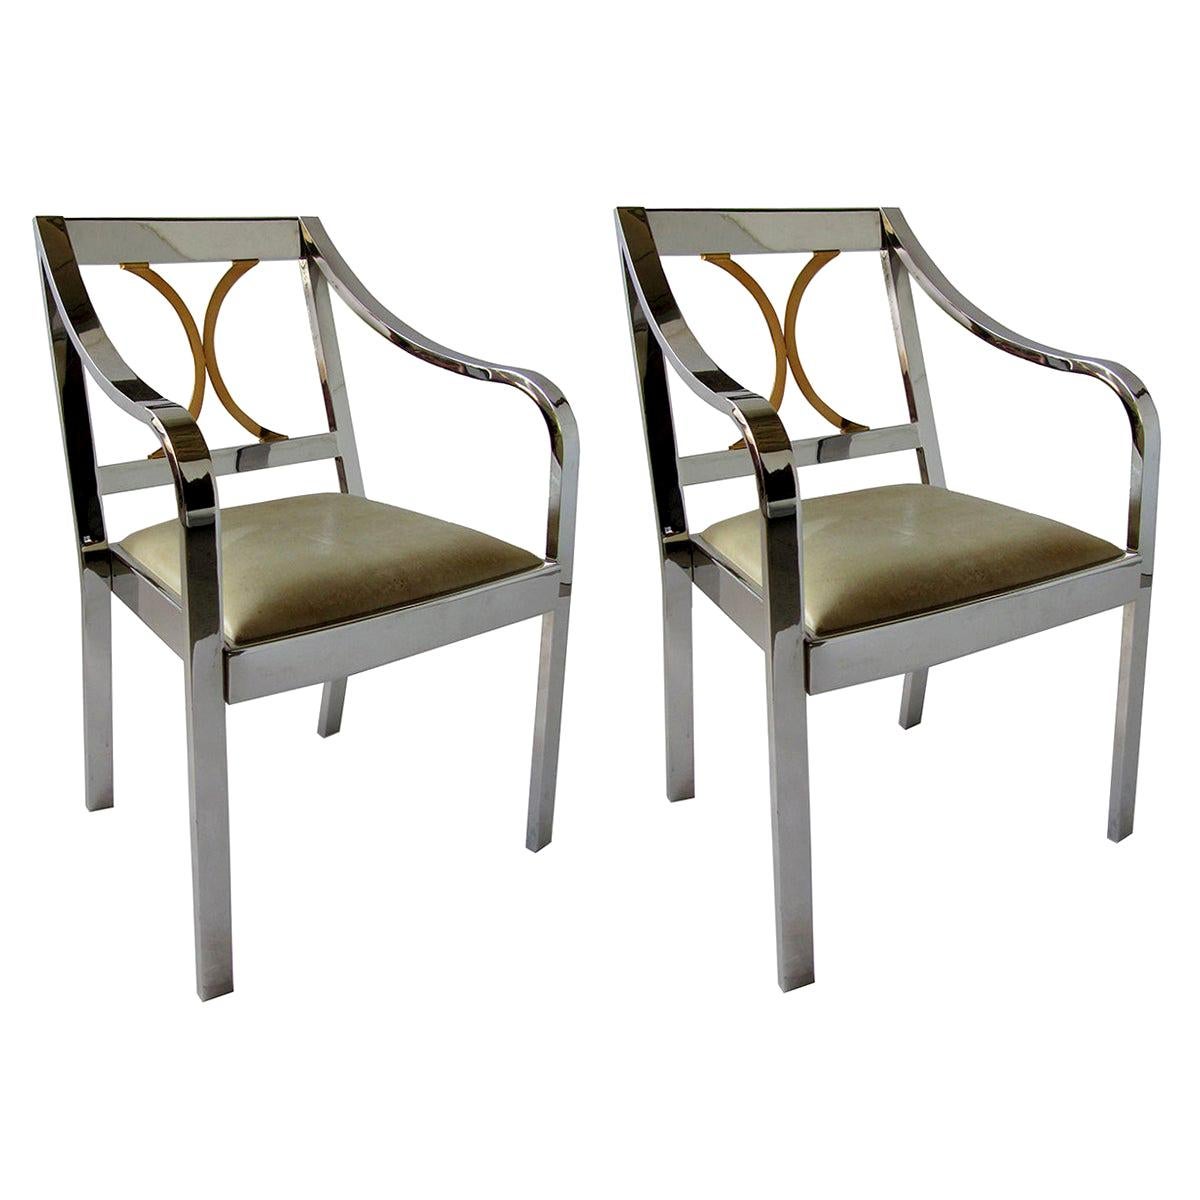 Pair of American Modern Armchairs in Polished Steel and Brass, Karl Springer For Sale